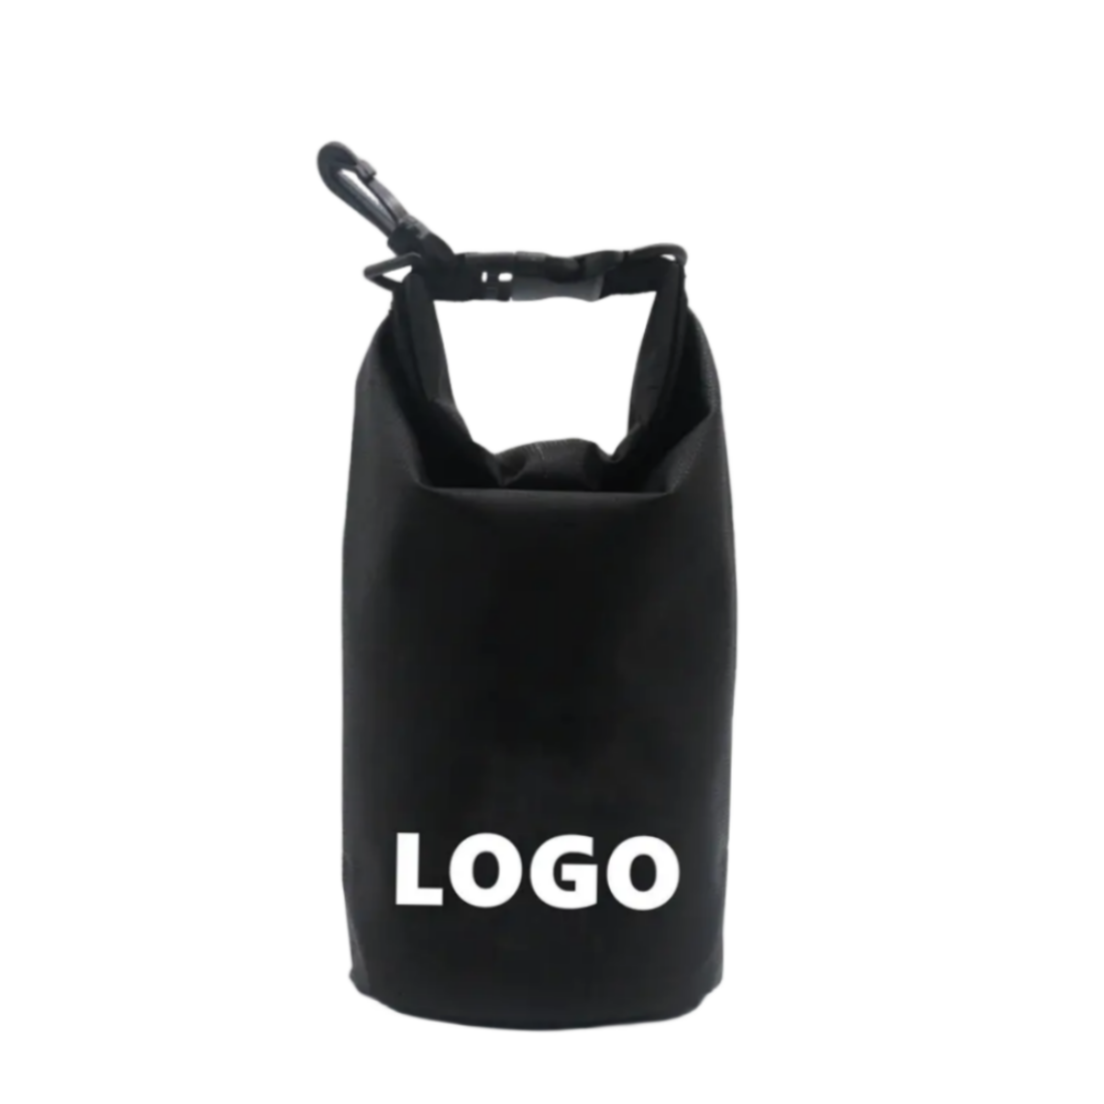 Small Roll Up Bucket Bag Black PVC Waterproof Dry Bag Outdoor Activities Camping Swimming Floating Waterproof PVC Bucket Dry Bag